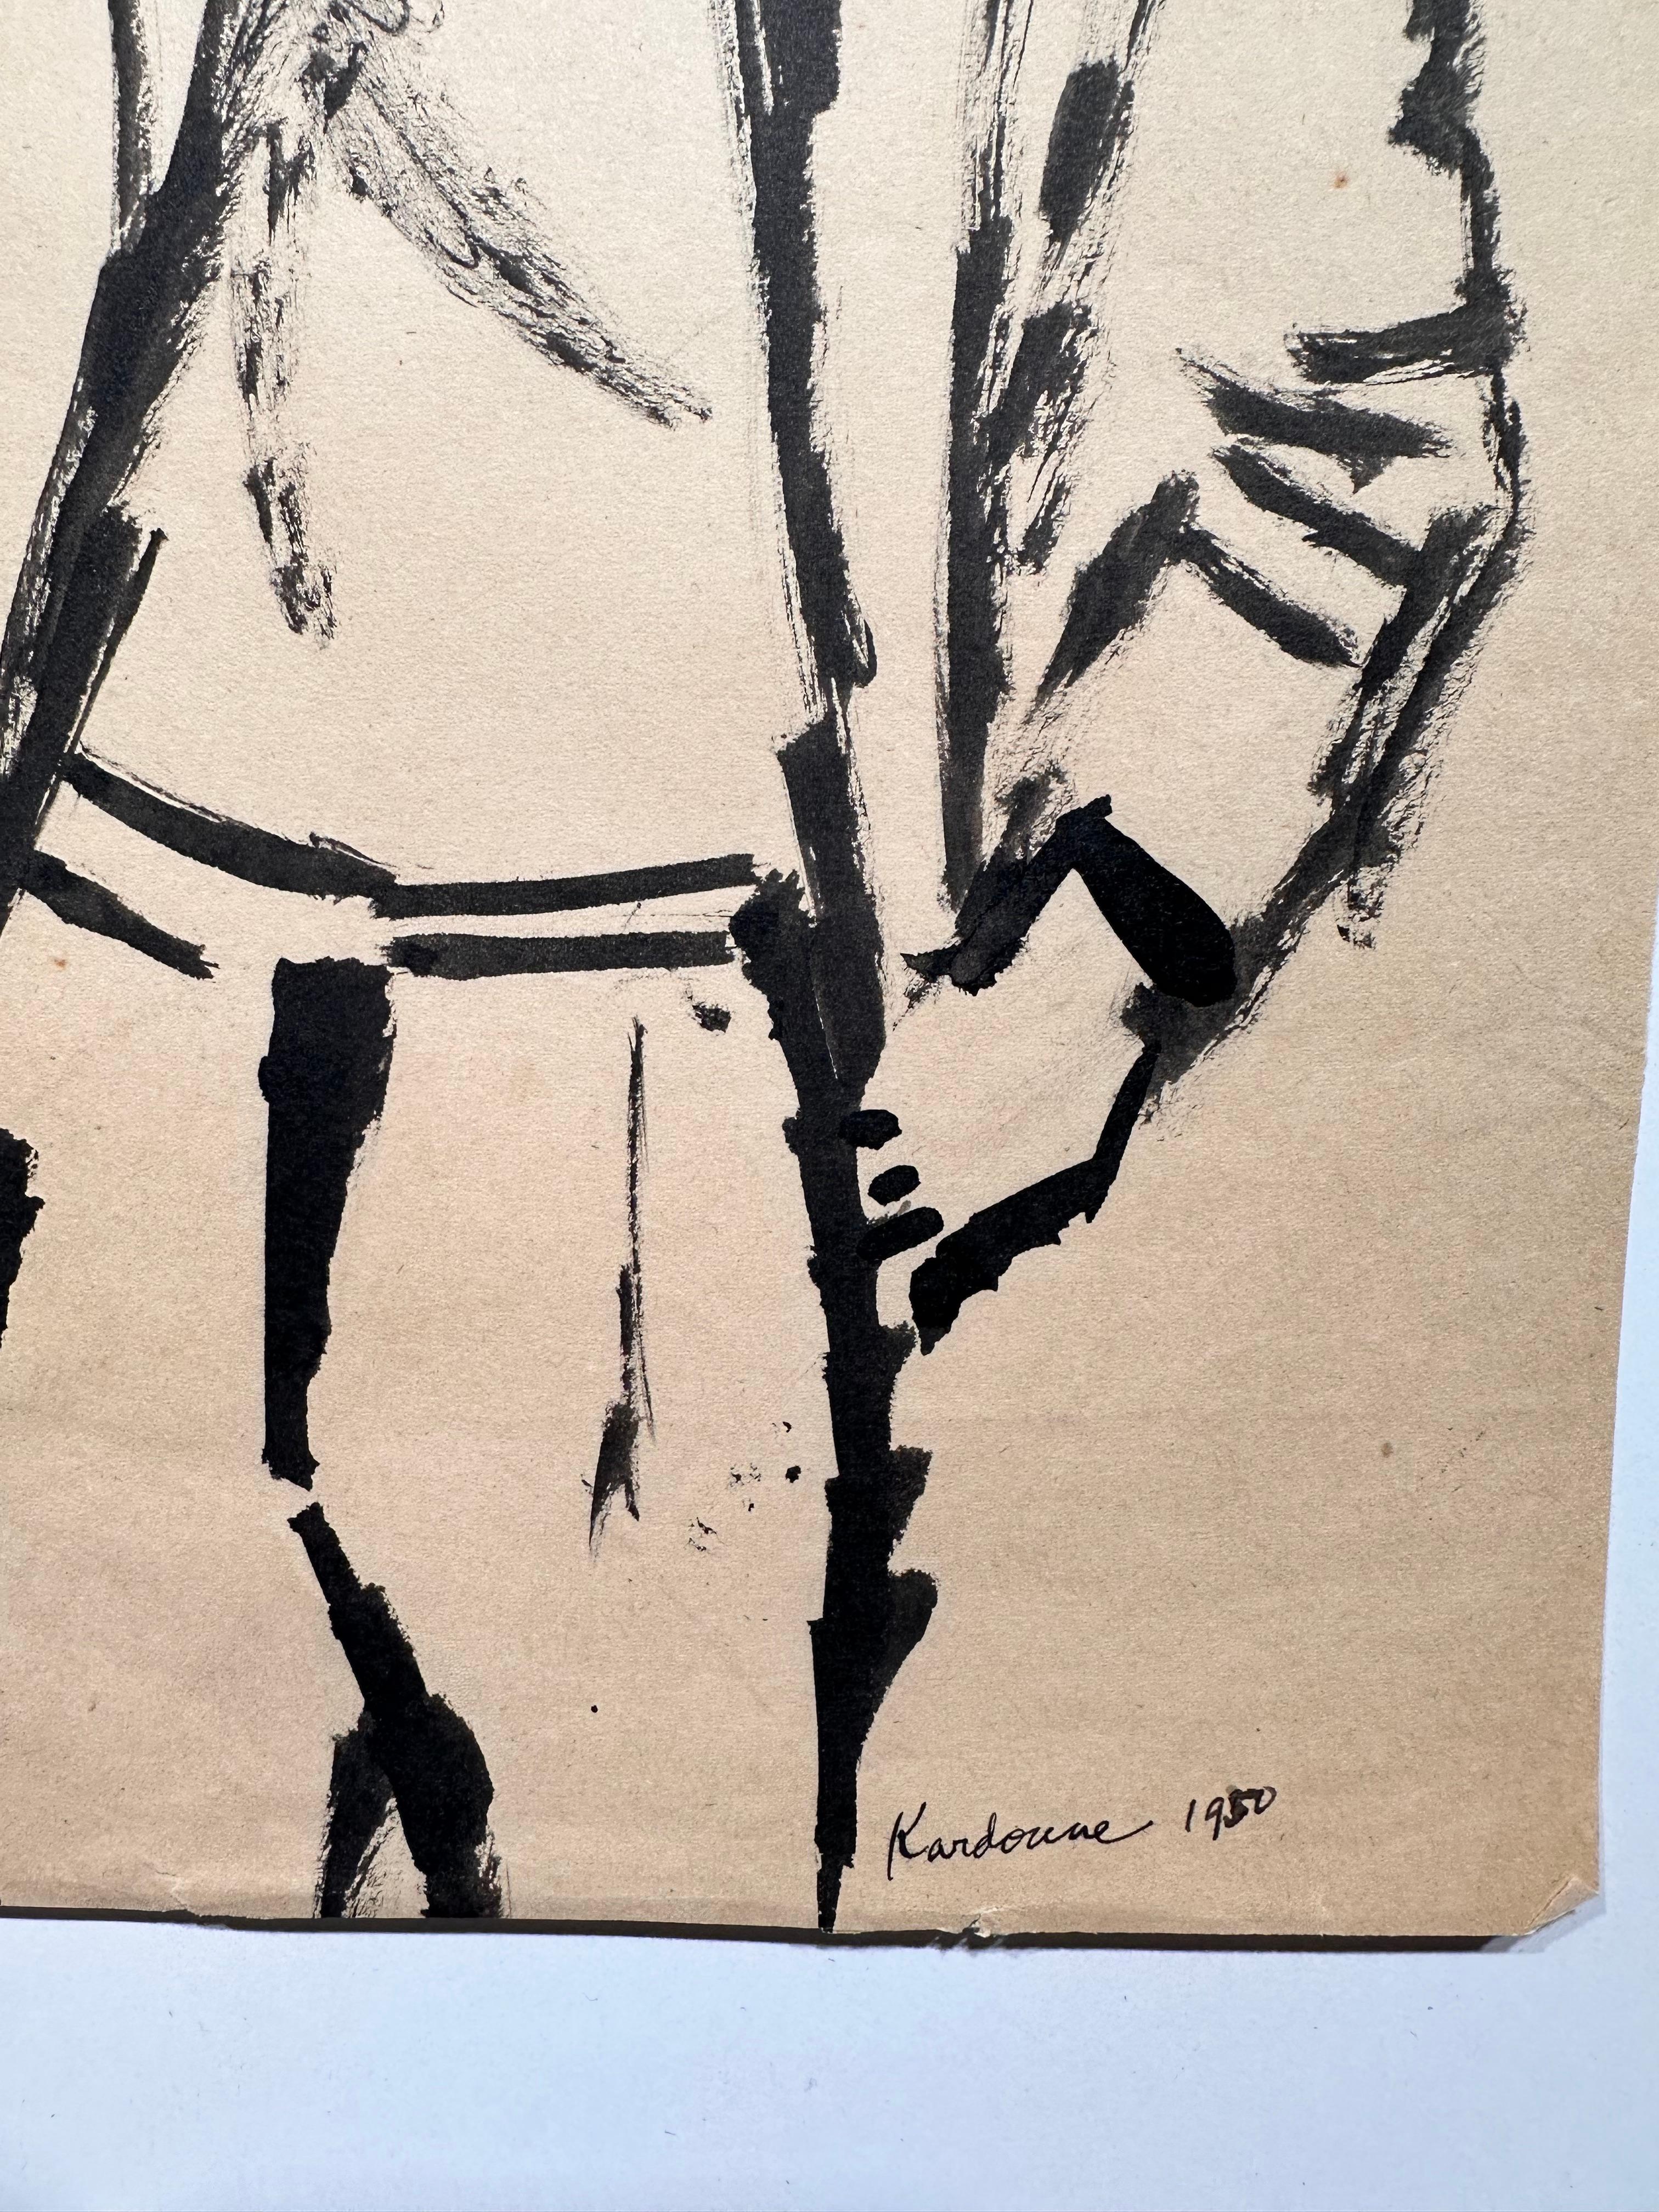 Joseph Kardonne (1911-1985). Portrait of Man in Trench Coat, 1950. Ink on paper, measuring 8 x 12 inches. Signed, dated and titled lower right. Unframed

Born in Newark, New Jersey in 1911, Joe Kardonne first showed an interest in art at an early